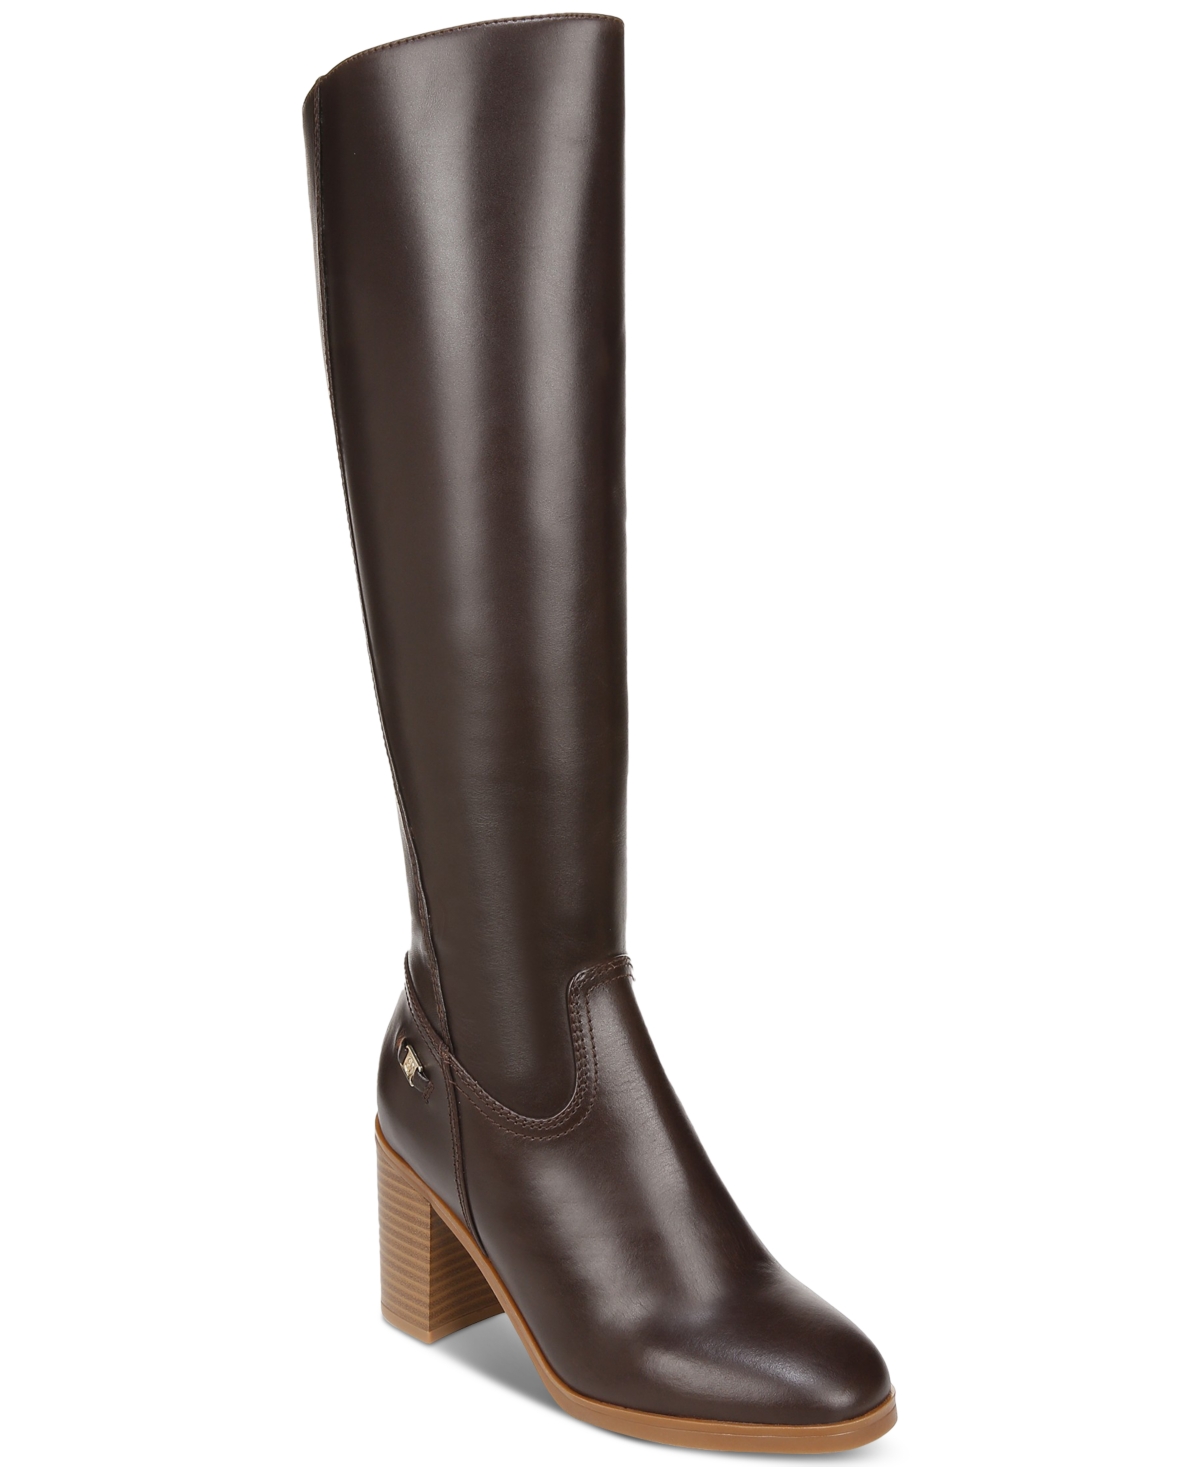 Odettee Zipper Riding Boots, Created for Macy's - Wine Leather